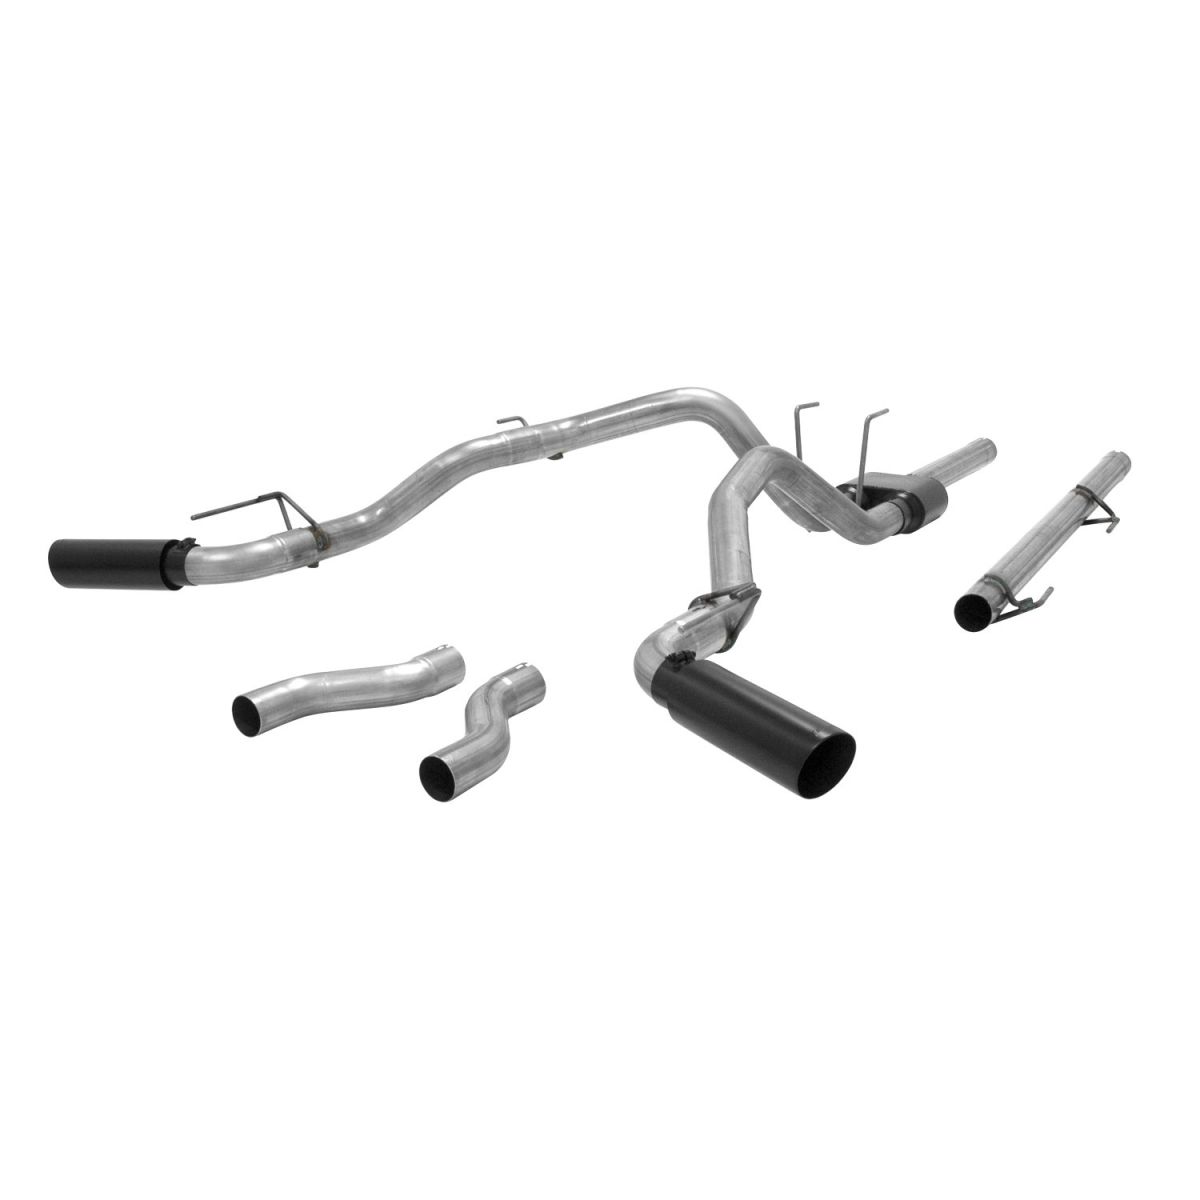 Flowmaster - Flowmaster Outlaw Series Cat-Back Exhaust System For 09-23 RAM 1500 4.7L / 5.7L